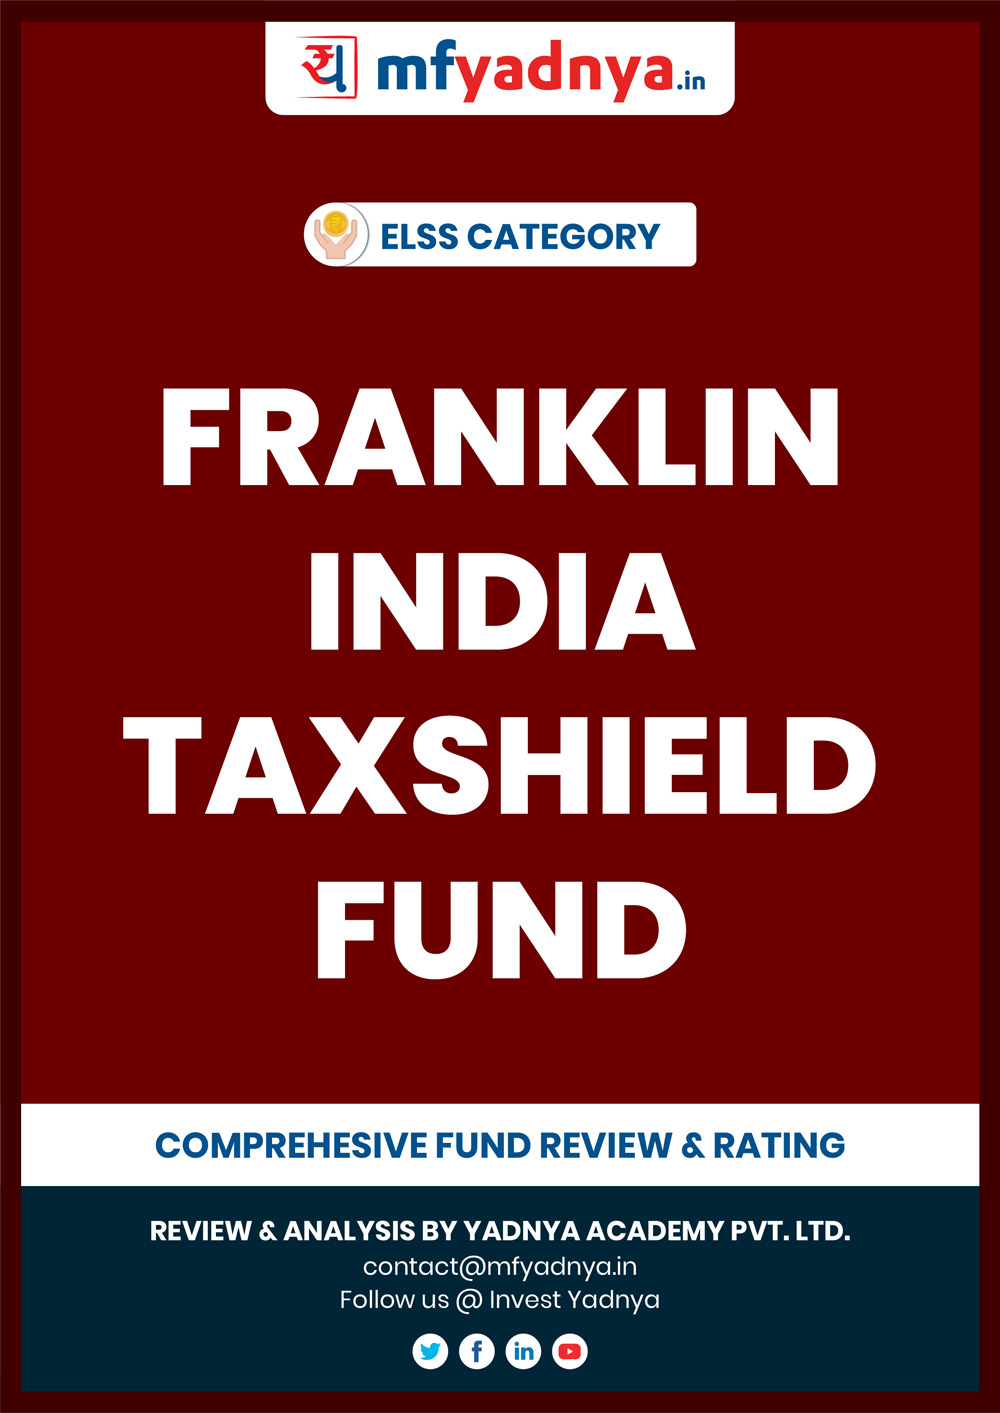 This e-book offers a comprehensive mutual fund review of Franklin India Taxshield fund of ELSS category. It reviews the fund's return, ratio, allocation etc. ✔ Detailed Mutual Fund Analysis ✔ Latest Research Reports